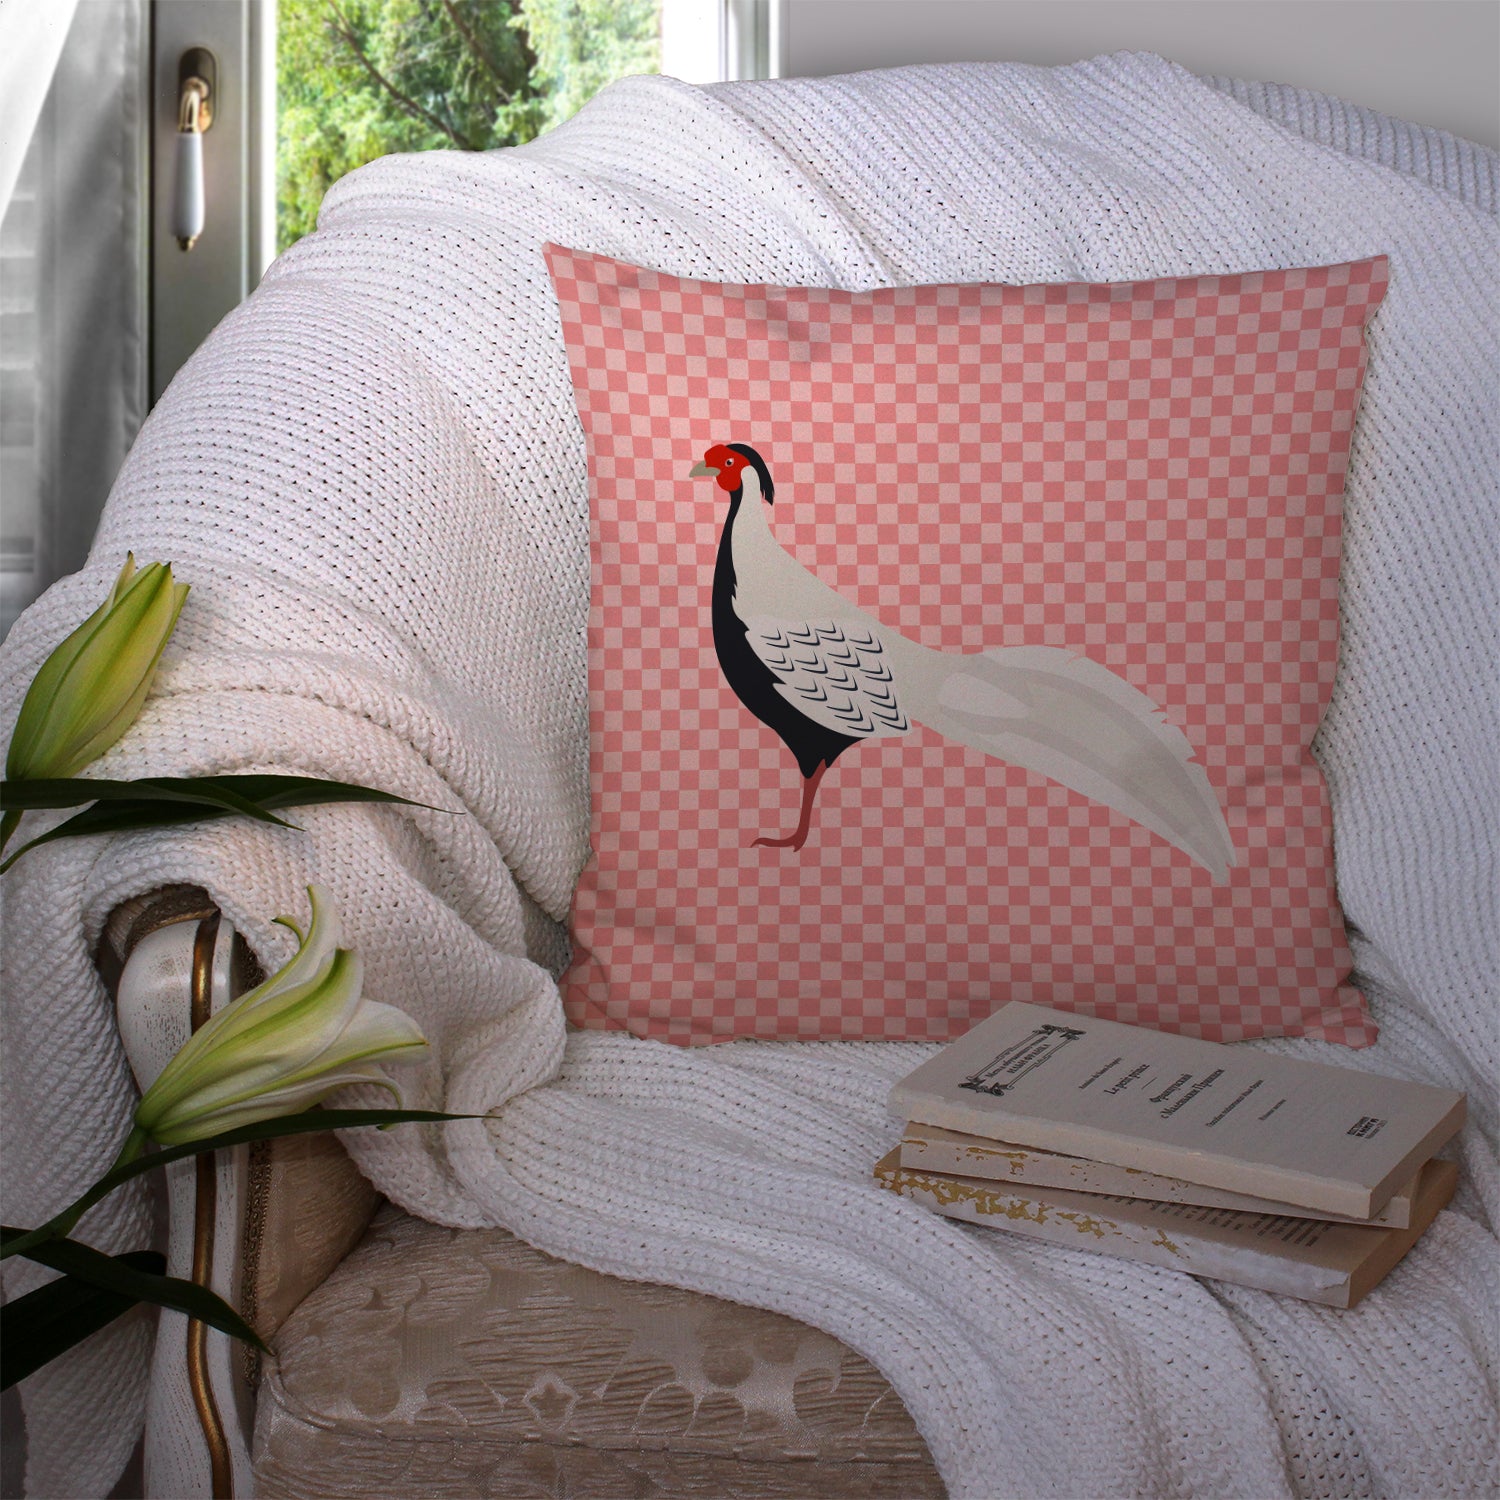 Silver Pheasant Pink Check Fabric Decorative Pillow BB7929PW1414 - the-store.com